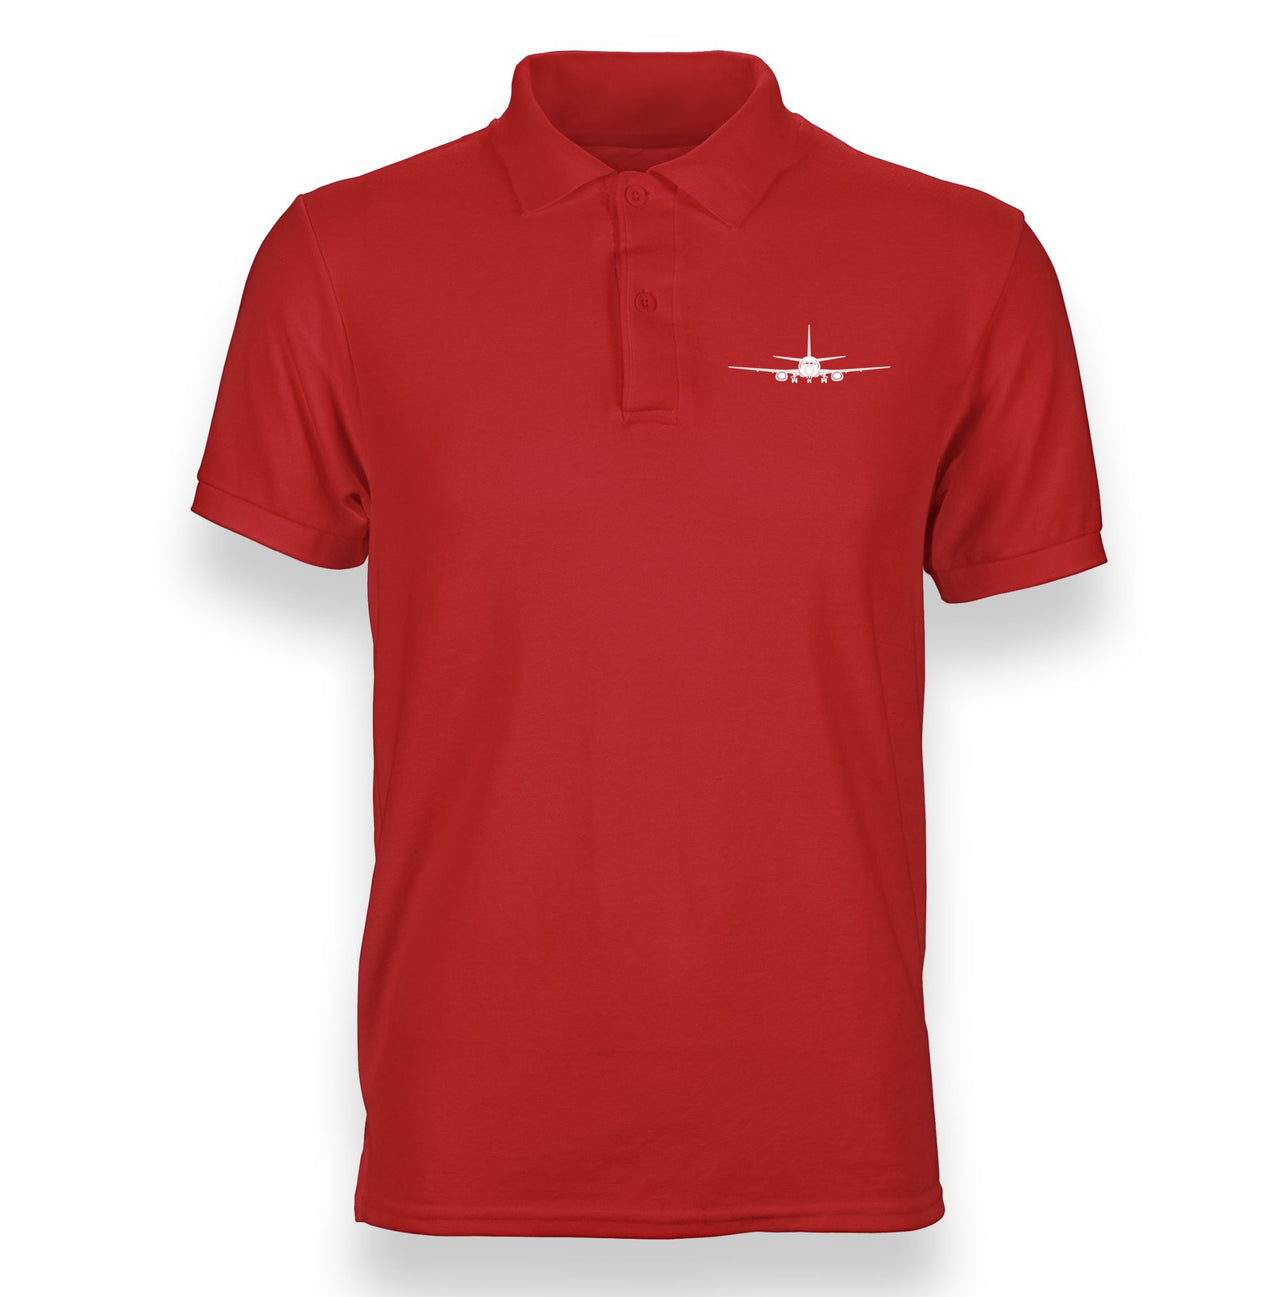 Boeing 737 Silhouette Designed "WOMEN" Polo T-Shirts